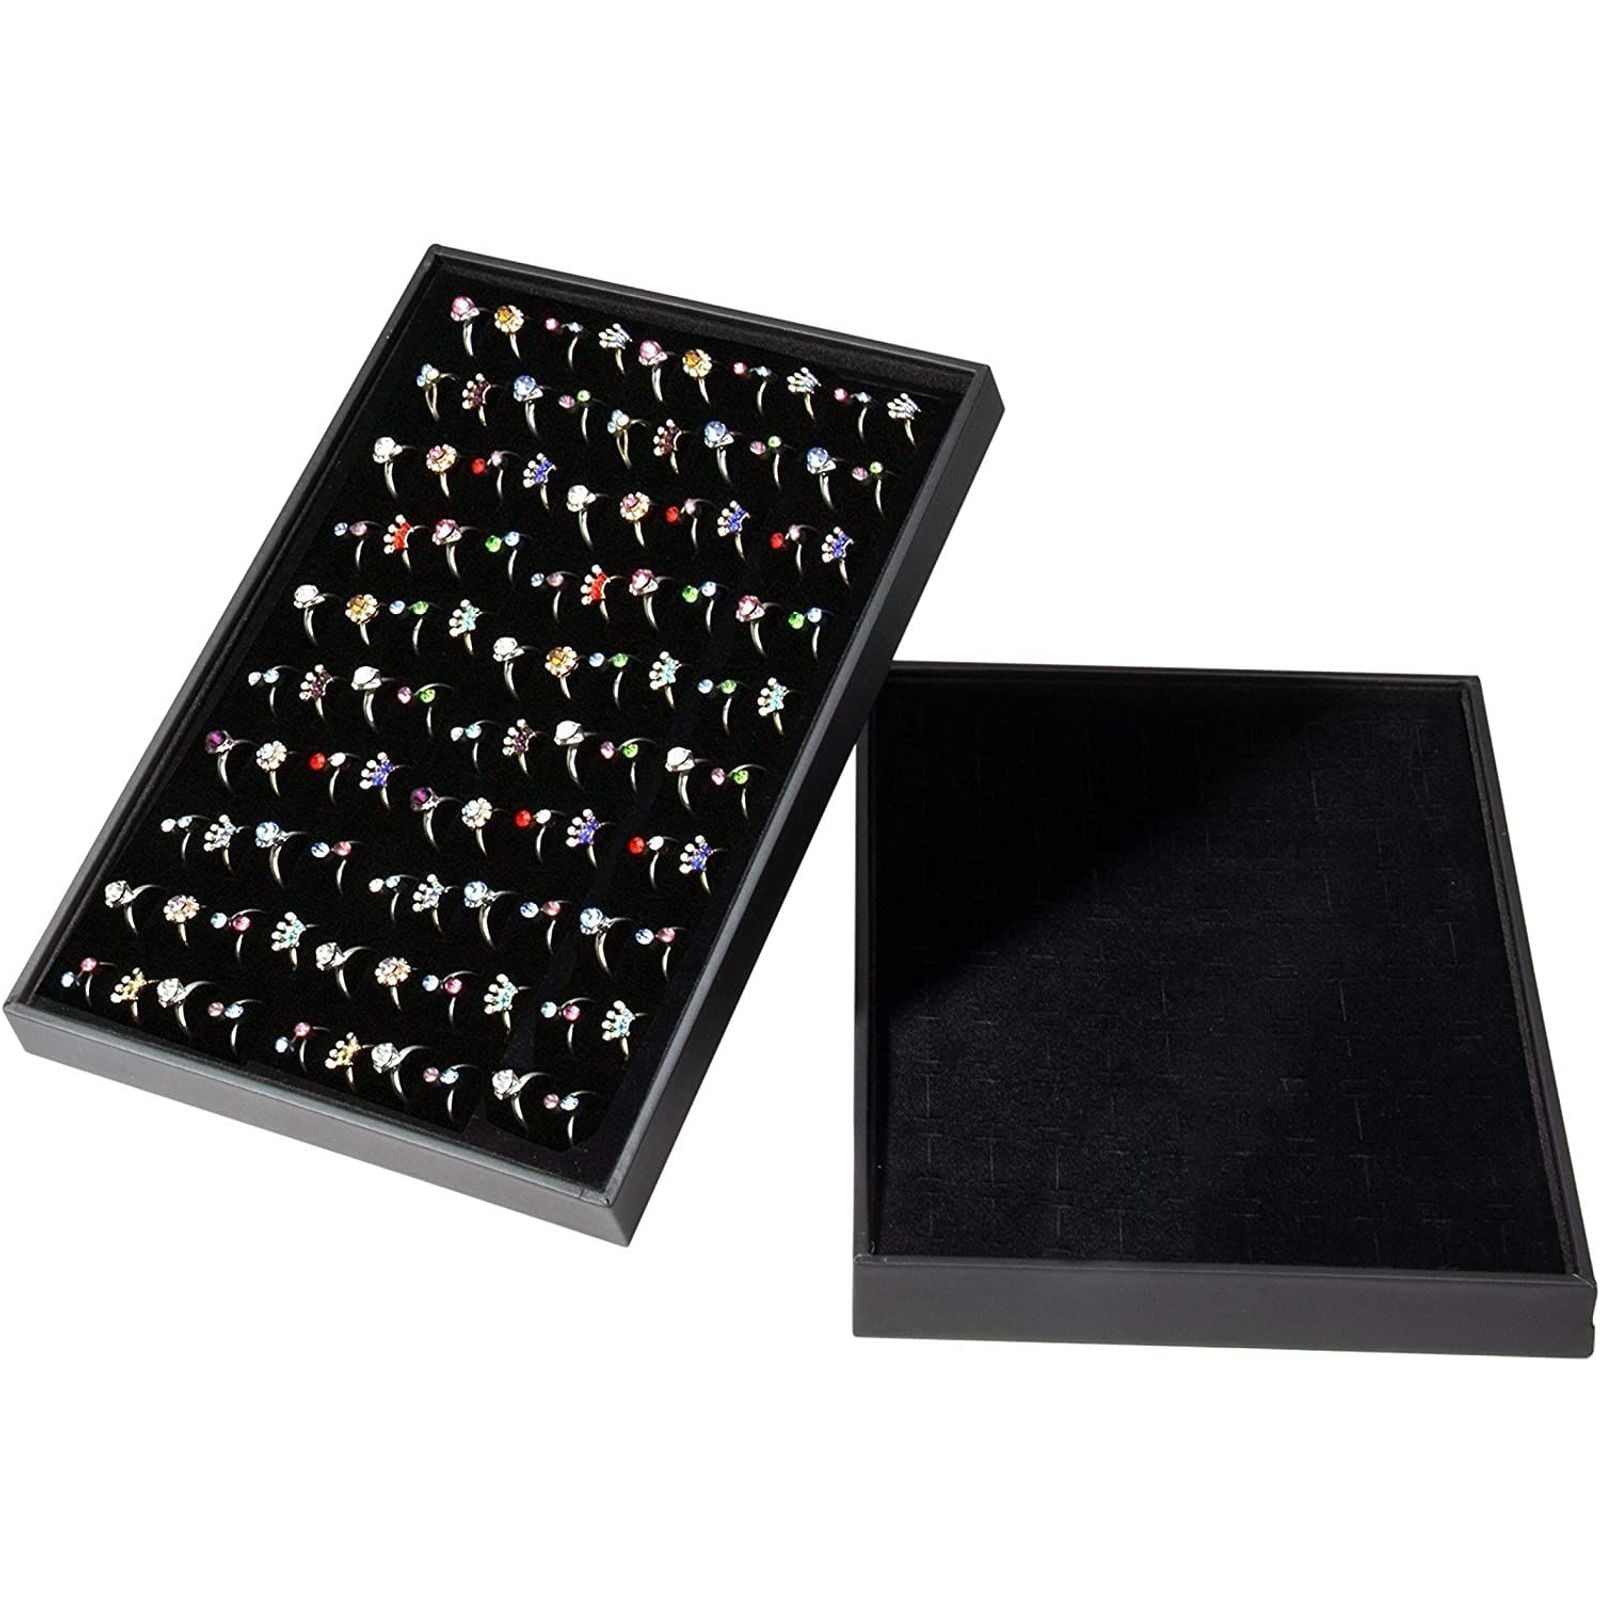 Details about   36 Slot Jewelry Ring Display Case Organizer Glass Top Storage Box Tray Holders 